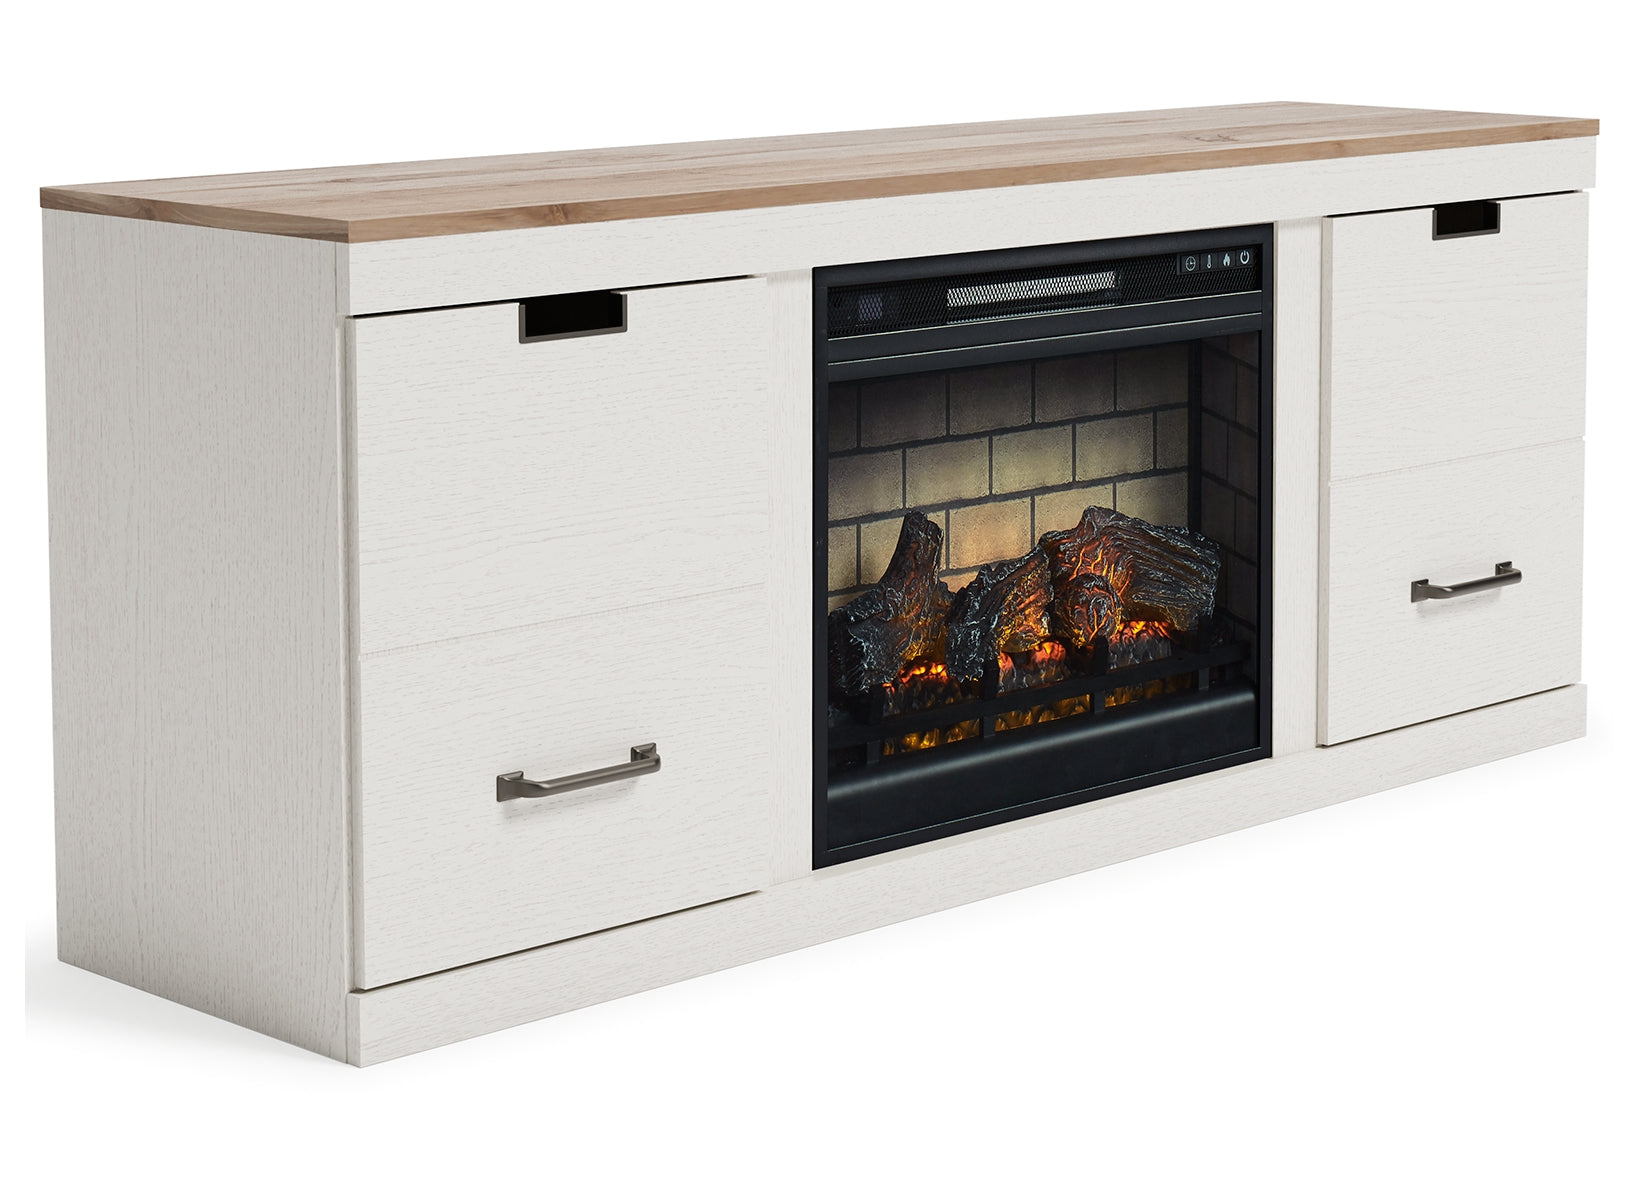 Vaibryn 60" TV Stand with Electric Fire Place